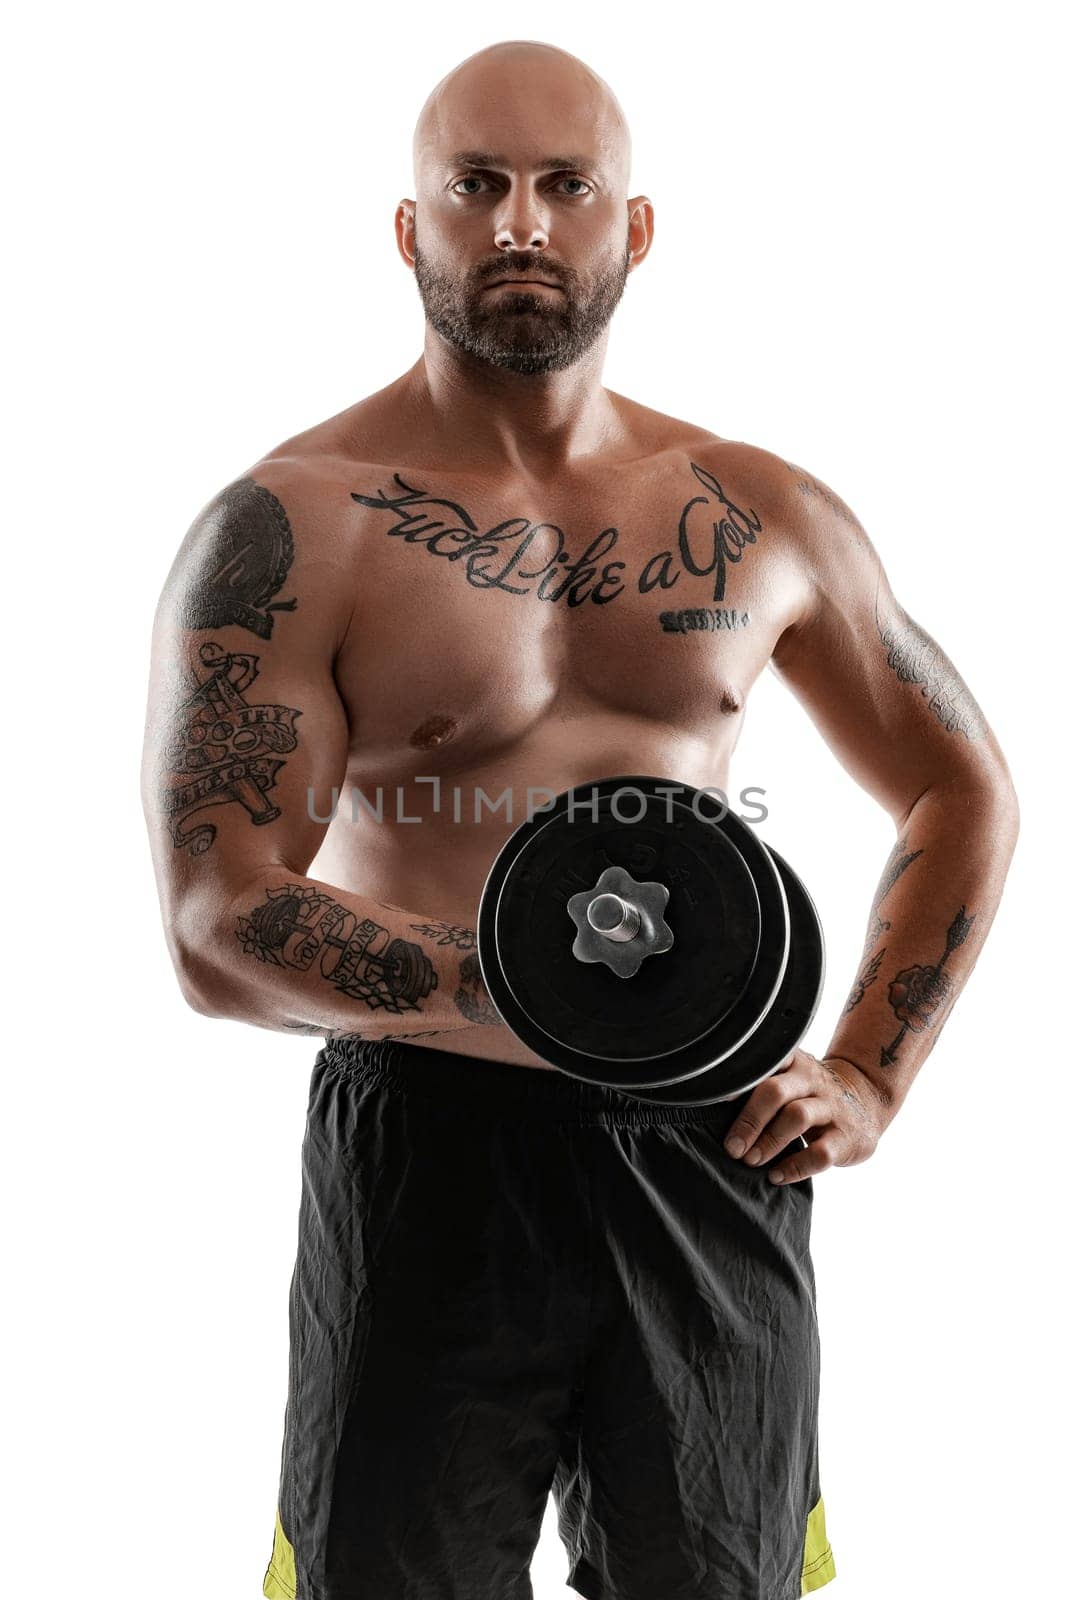 Handsome bald, bearded, tattooed person in black shorts is posing holding a dumbbell in his hand and looking at the camera, isolated on white background . Chic muscular body, fitness, gym, healthy lifestyle concept. Close-up portrait.